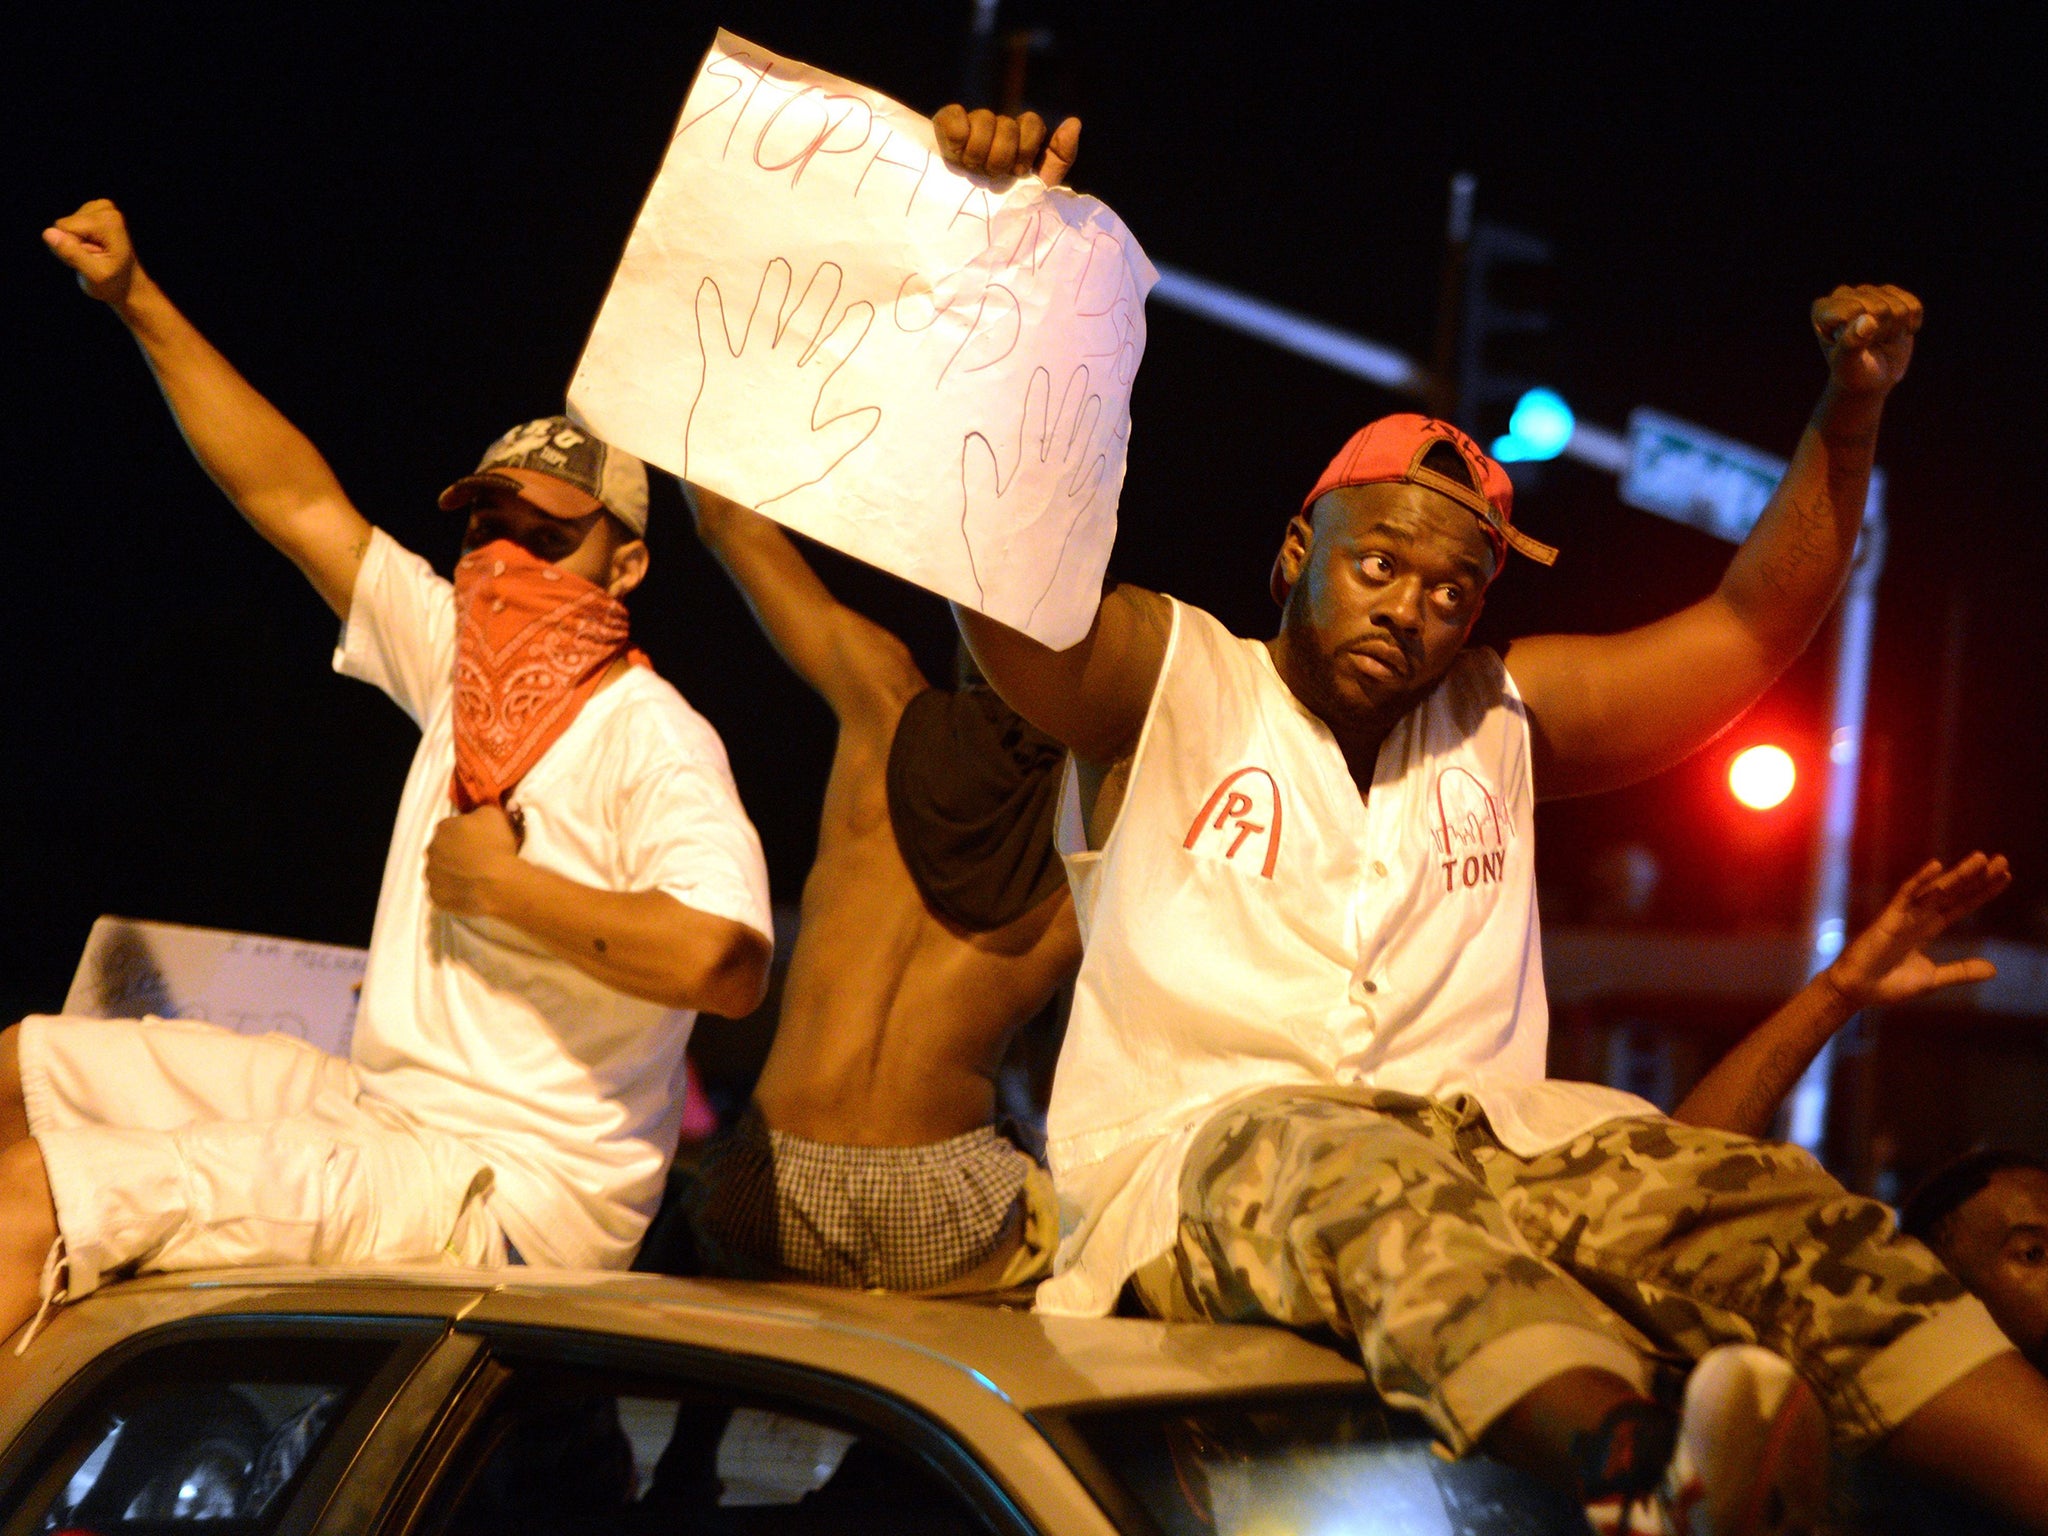 Protesters ride on top of a car as they gather on West Florissant Avenue in Ferguson, Missouri